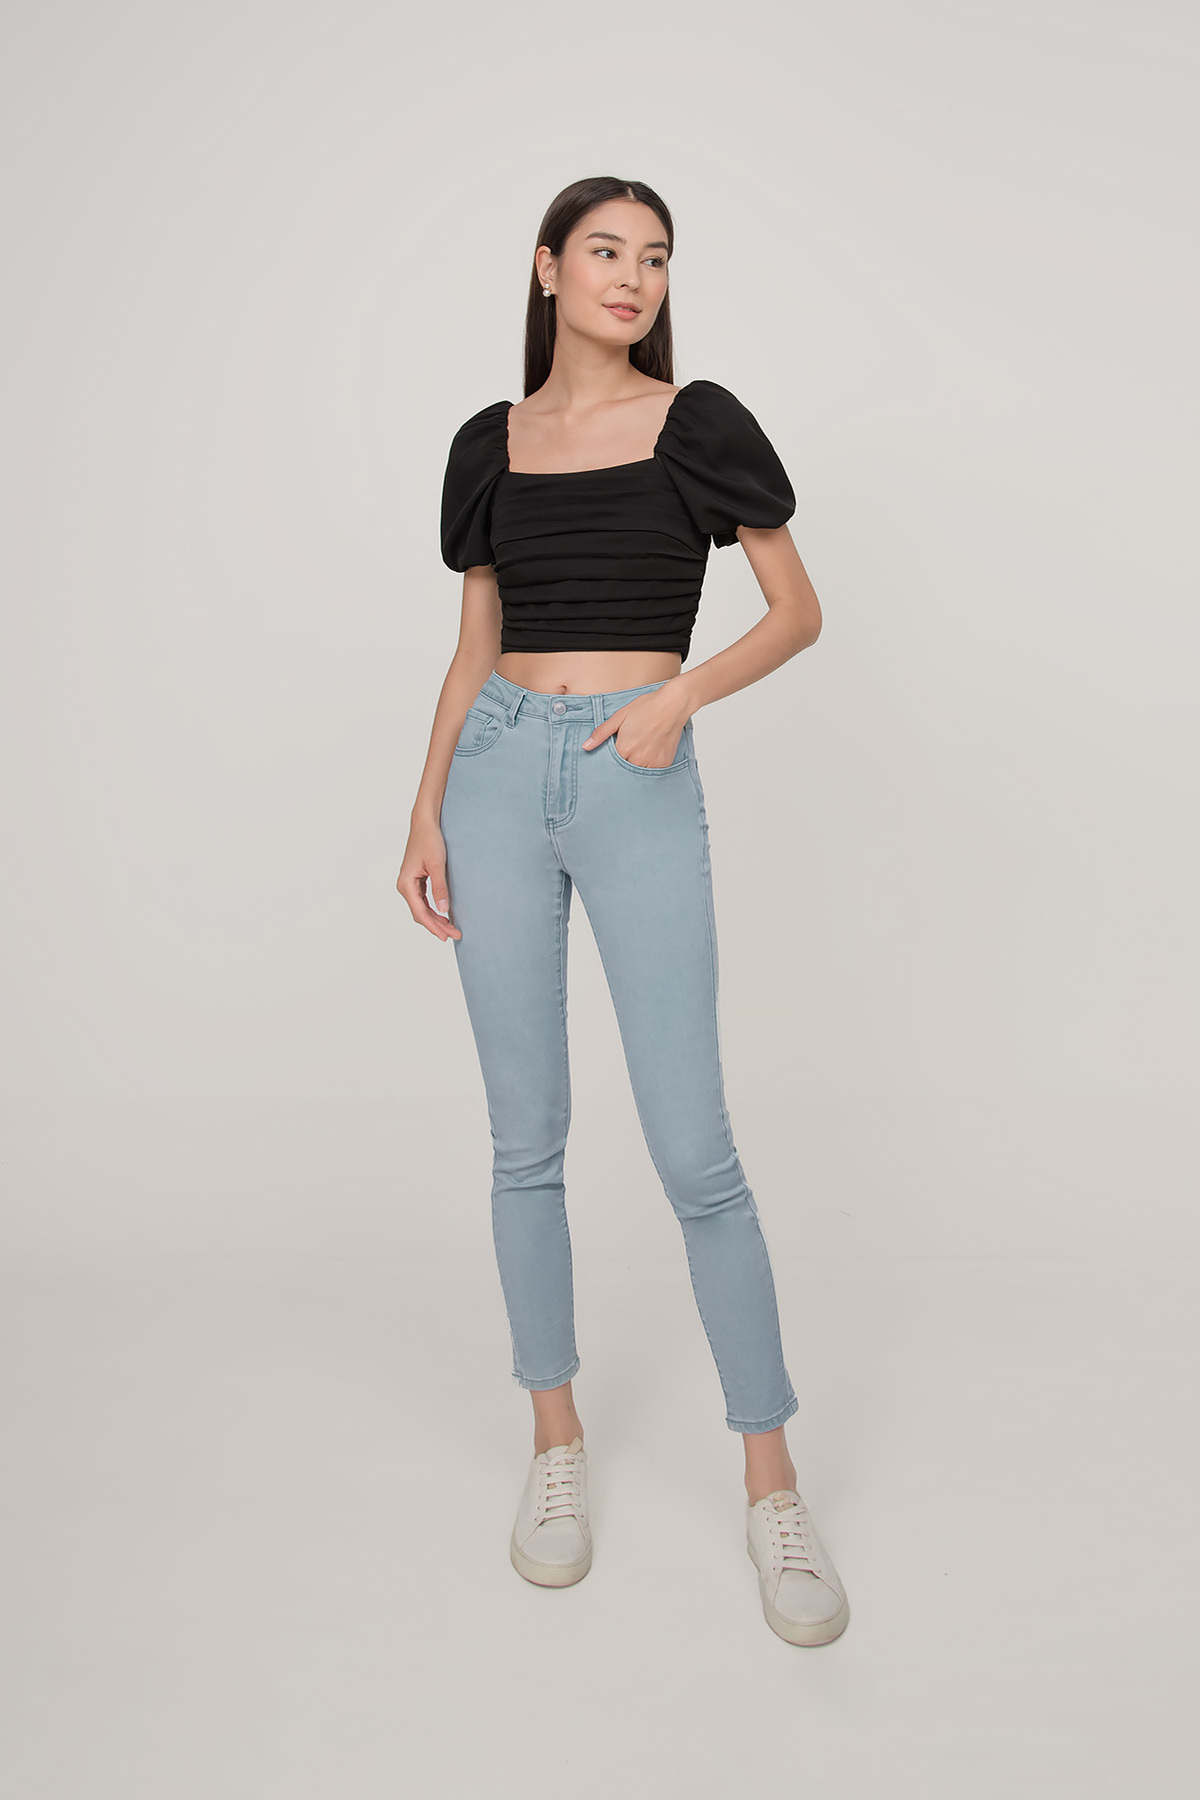 Fayth • Raychelle Ruched Puff Sleeve Crop Top